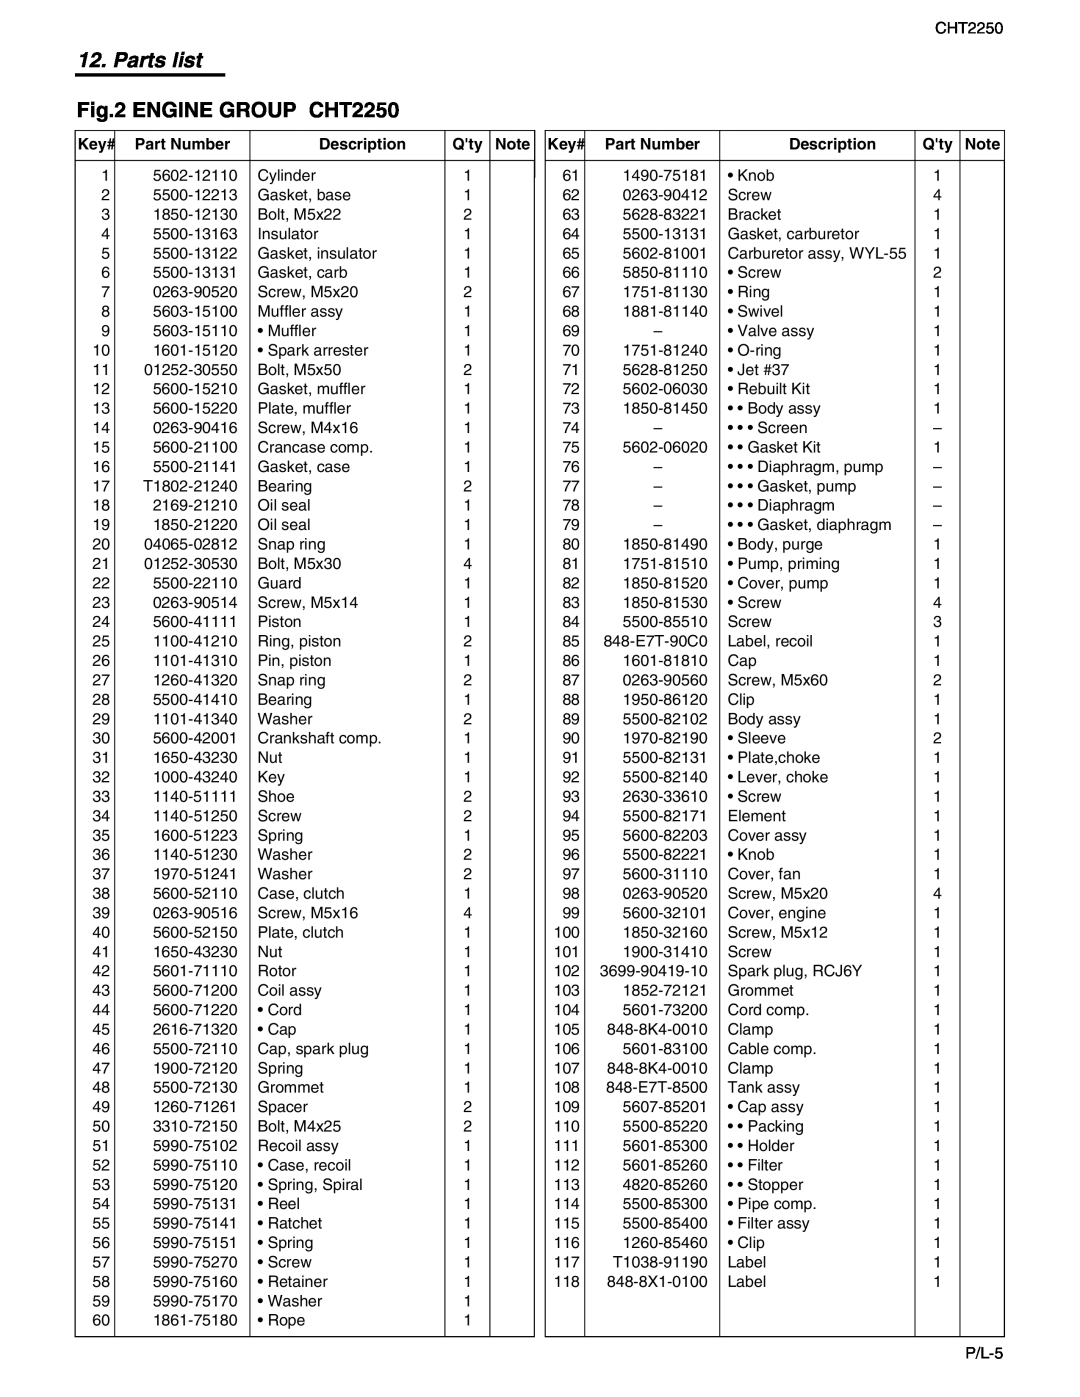 RedMax manual Parts list, ENGINE GROUP CHT2250 